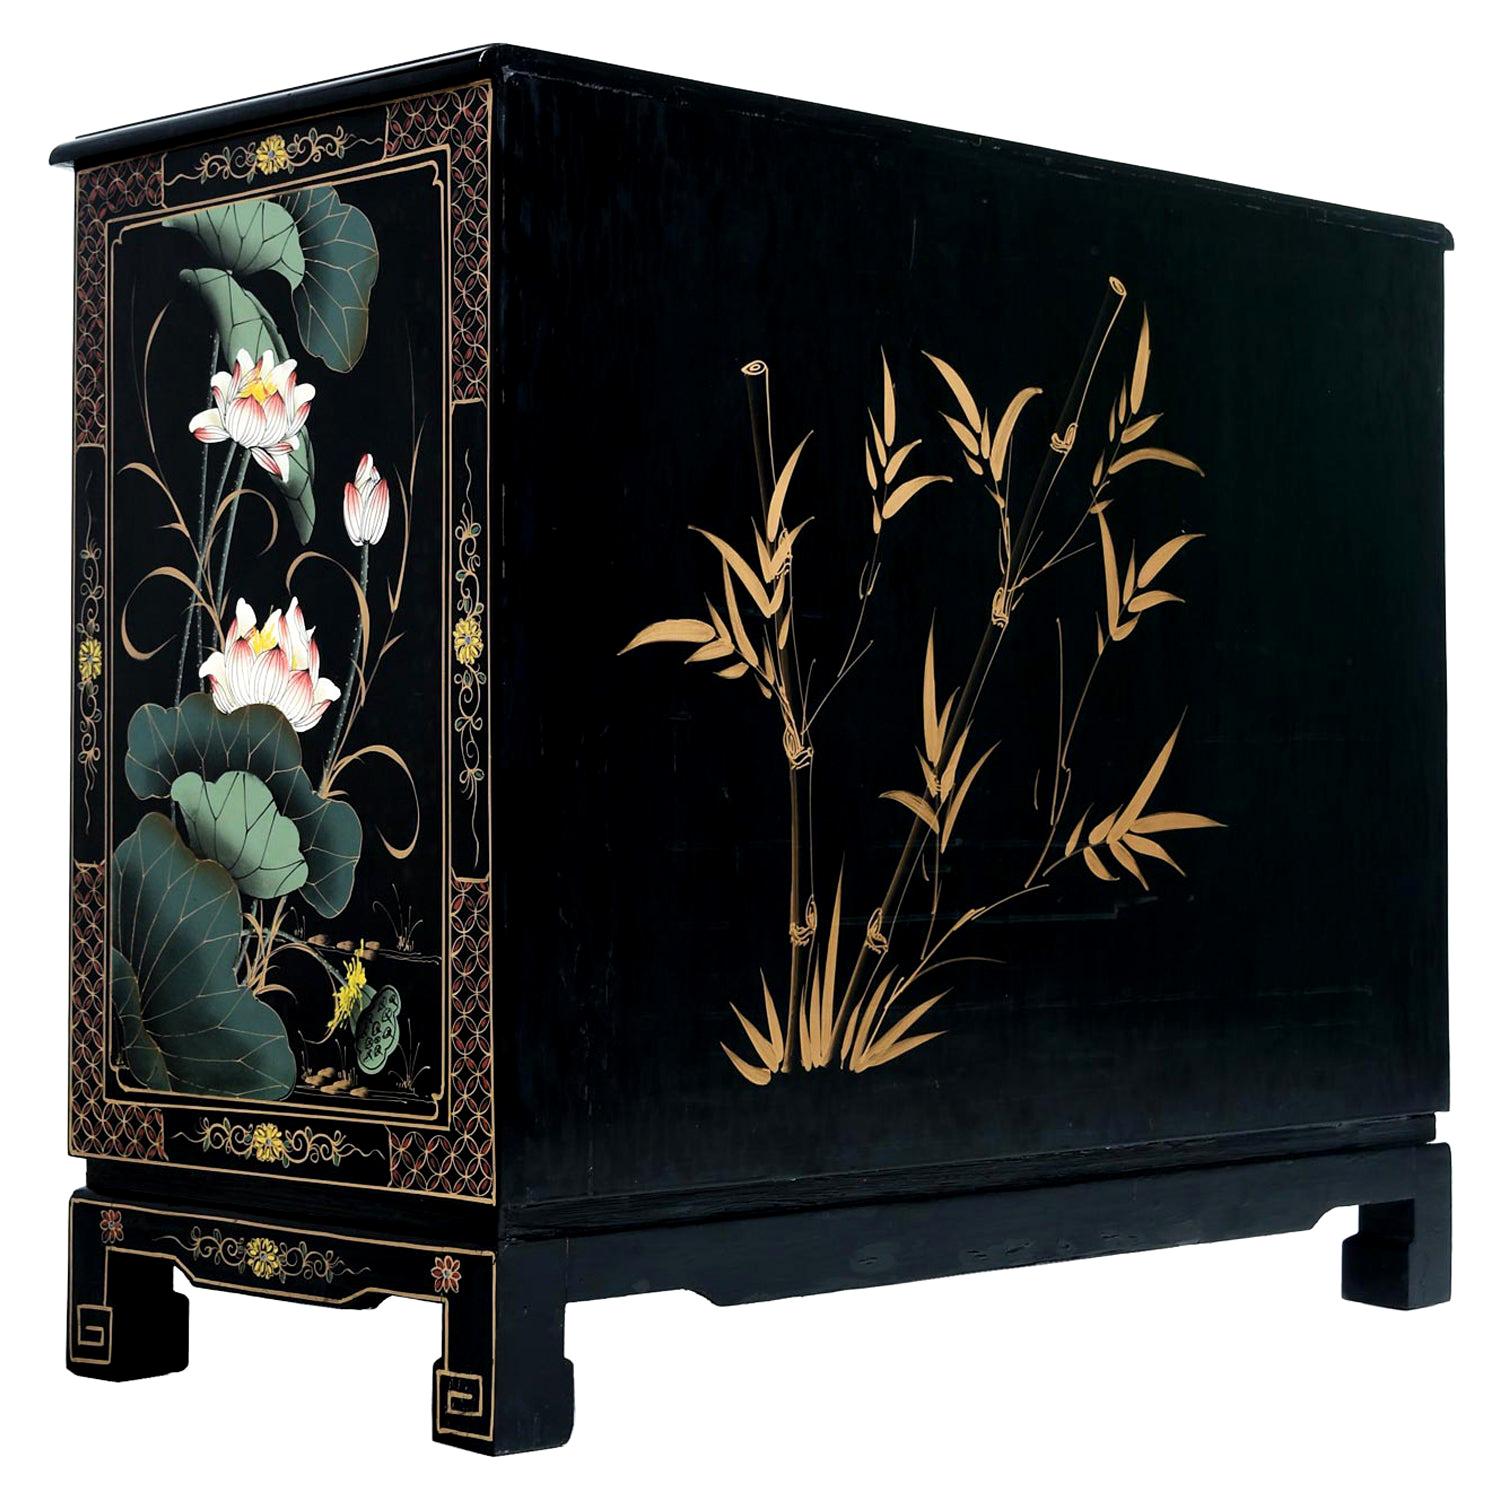 This incomparable chinoiserie black lacquer dresser depicts 12 mother of pearl figures in various tai chi poses. What more can you ask for really? As if that's not enough, there's plenty of traditional hand painted Asian motif from head to toe. The